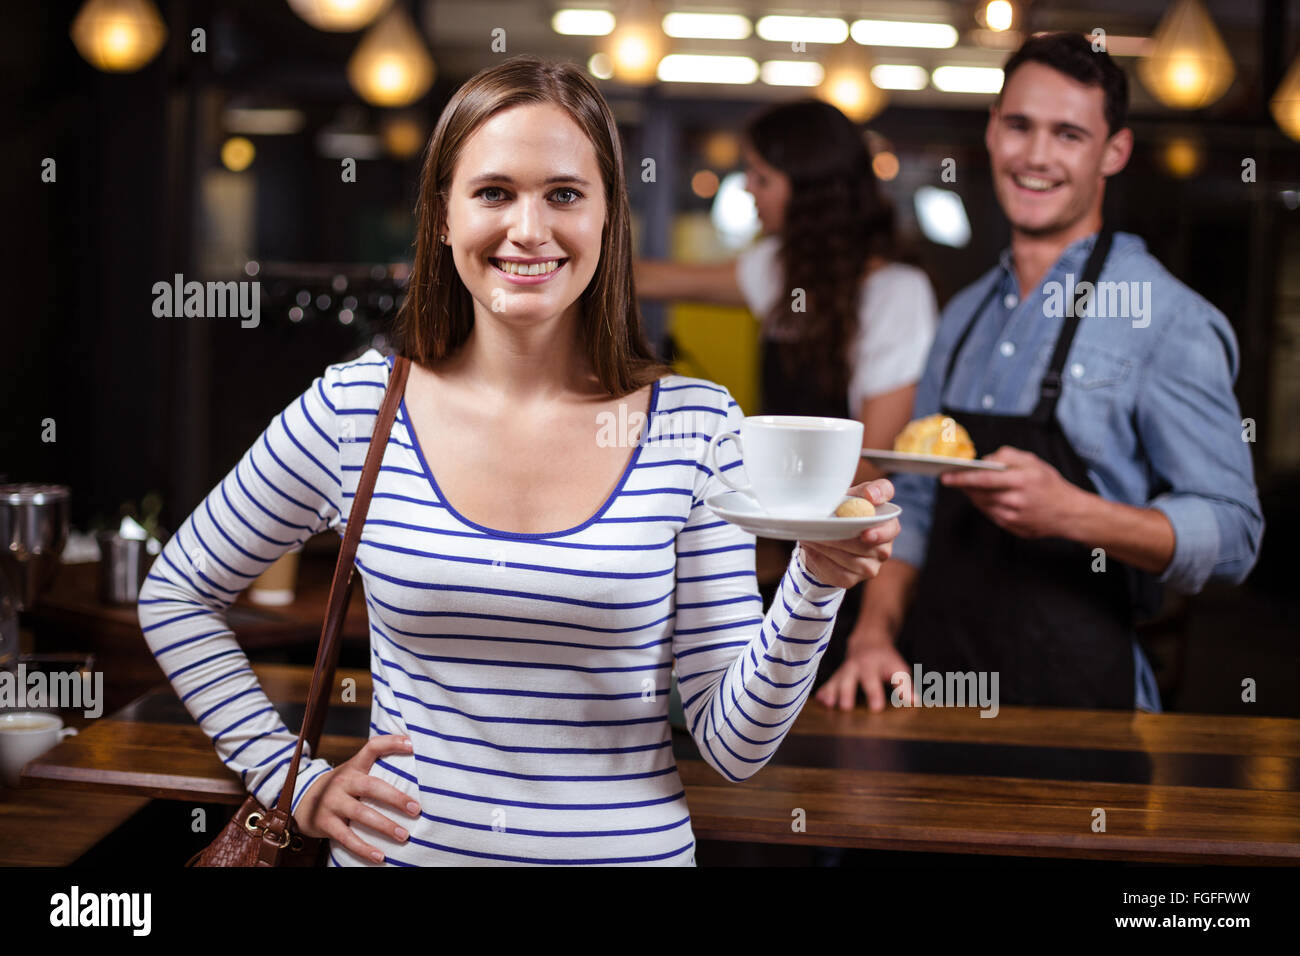 Smiling woman holding white cup Stock Photo